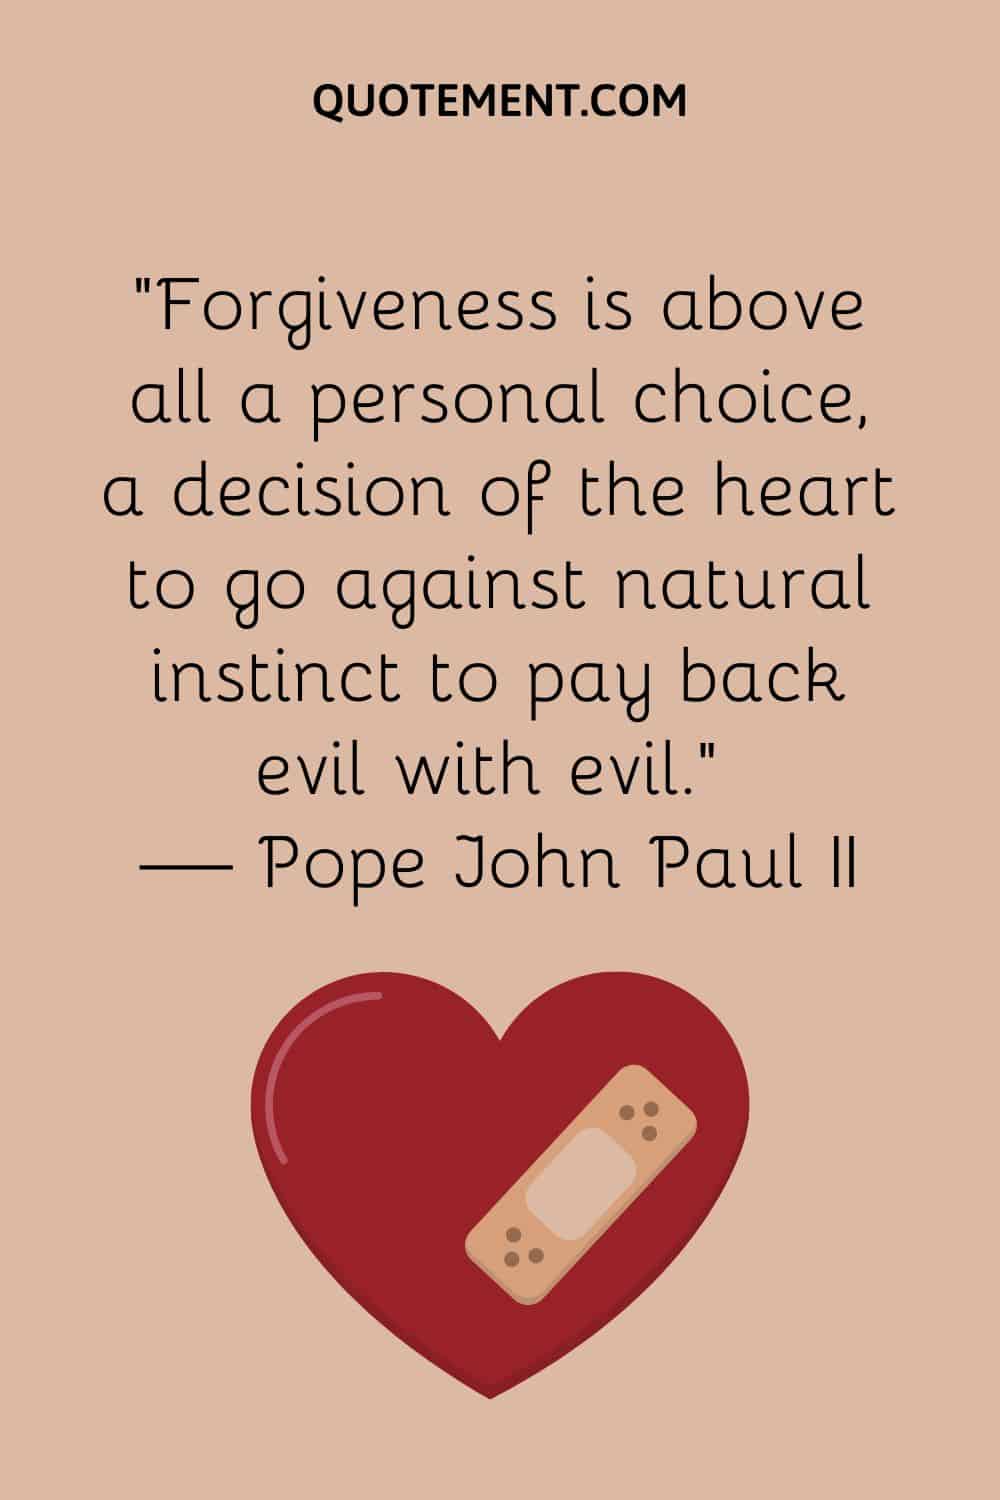 Forgiveness is above all a personal choice